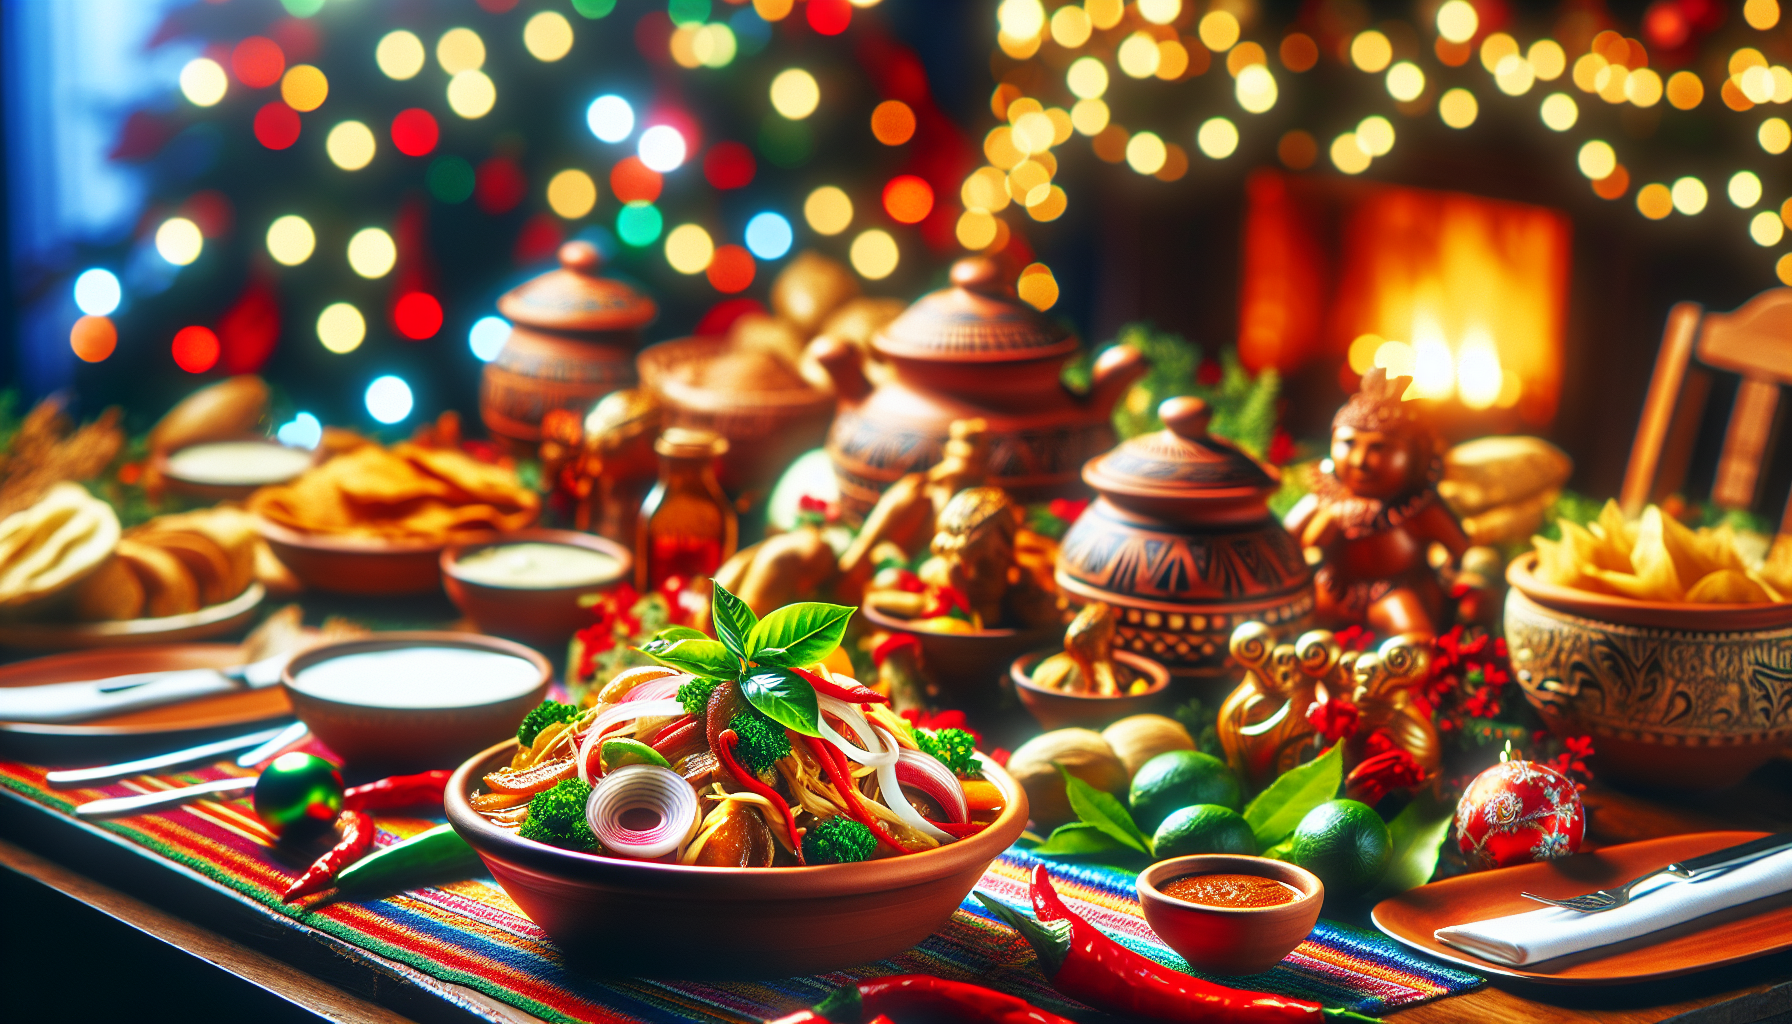 What Are The Traditional Nicaraguan Christmas Or Holiday Dishes?